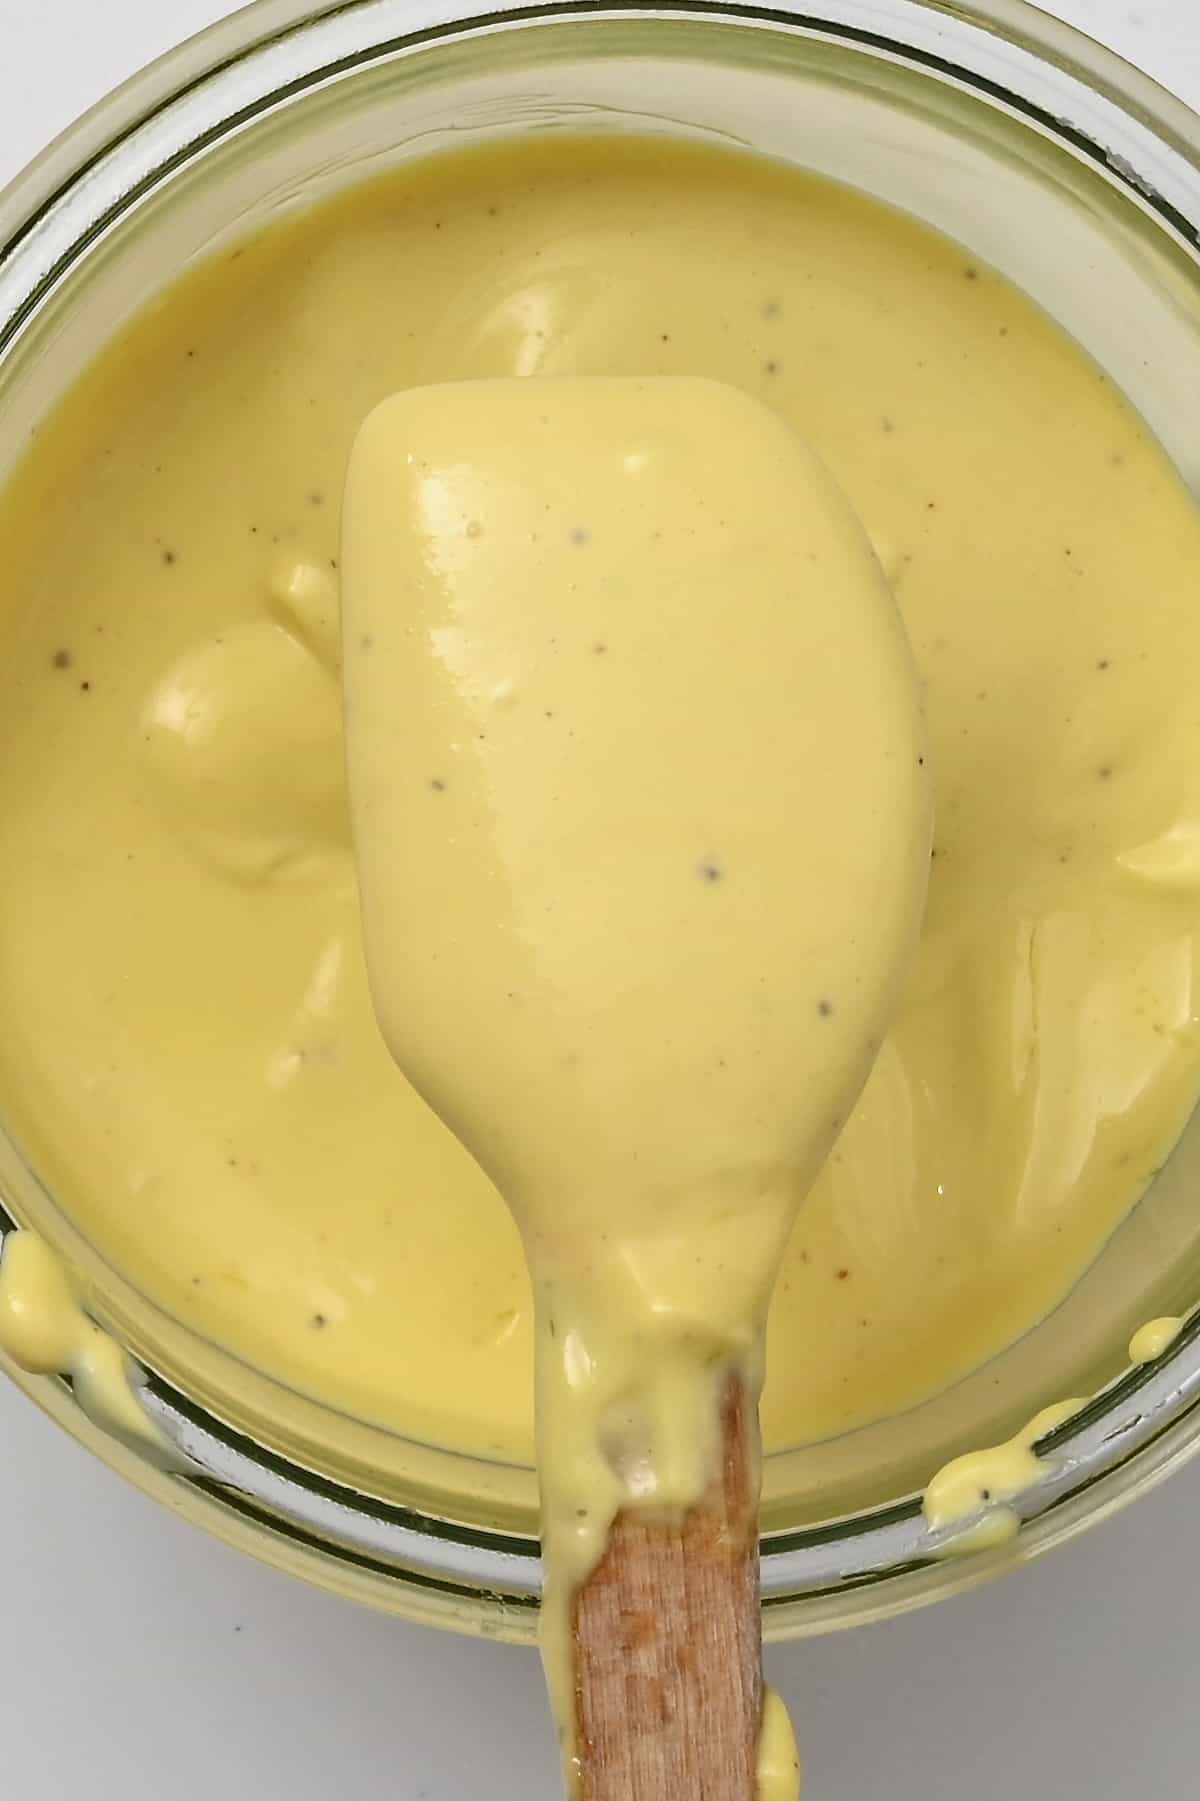 A spoonful of garlic mayo over a jar full with it